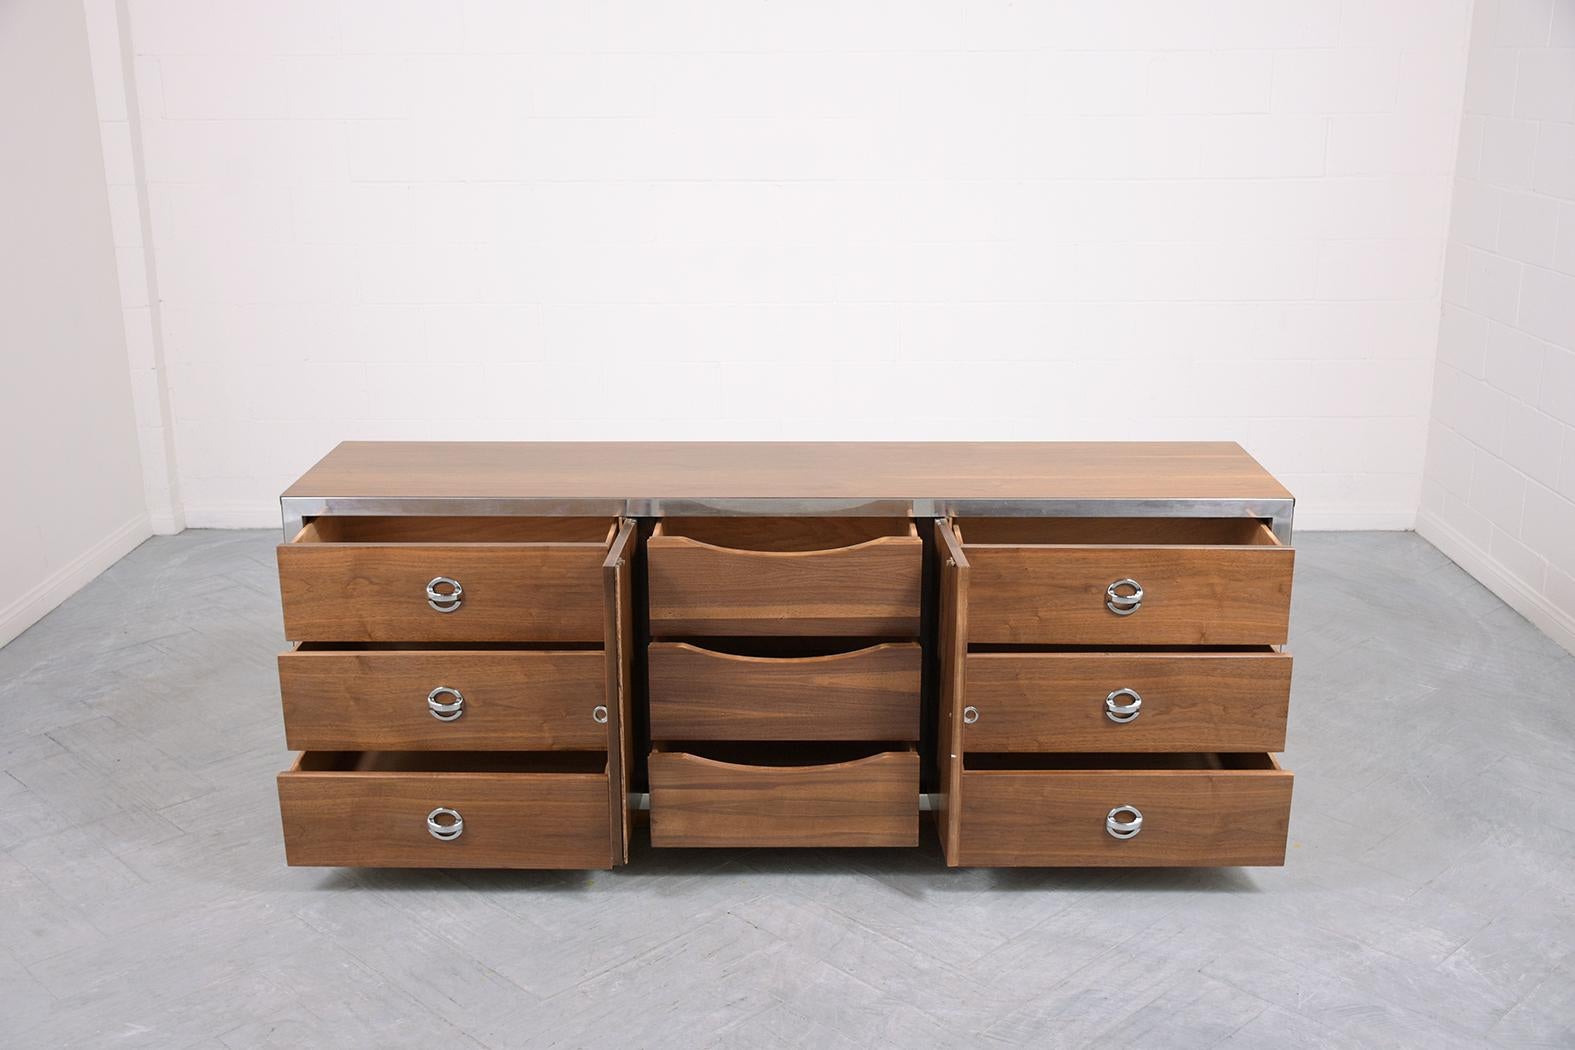 American Restored Mid-Century Modern Walnut Chest of Drawers: 1960s Elegance For Sale